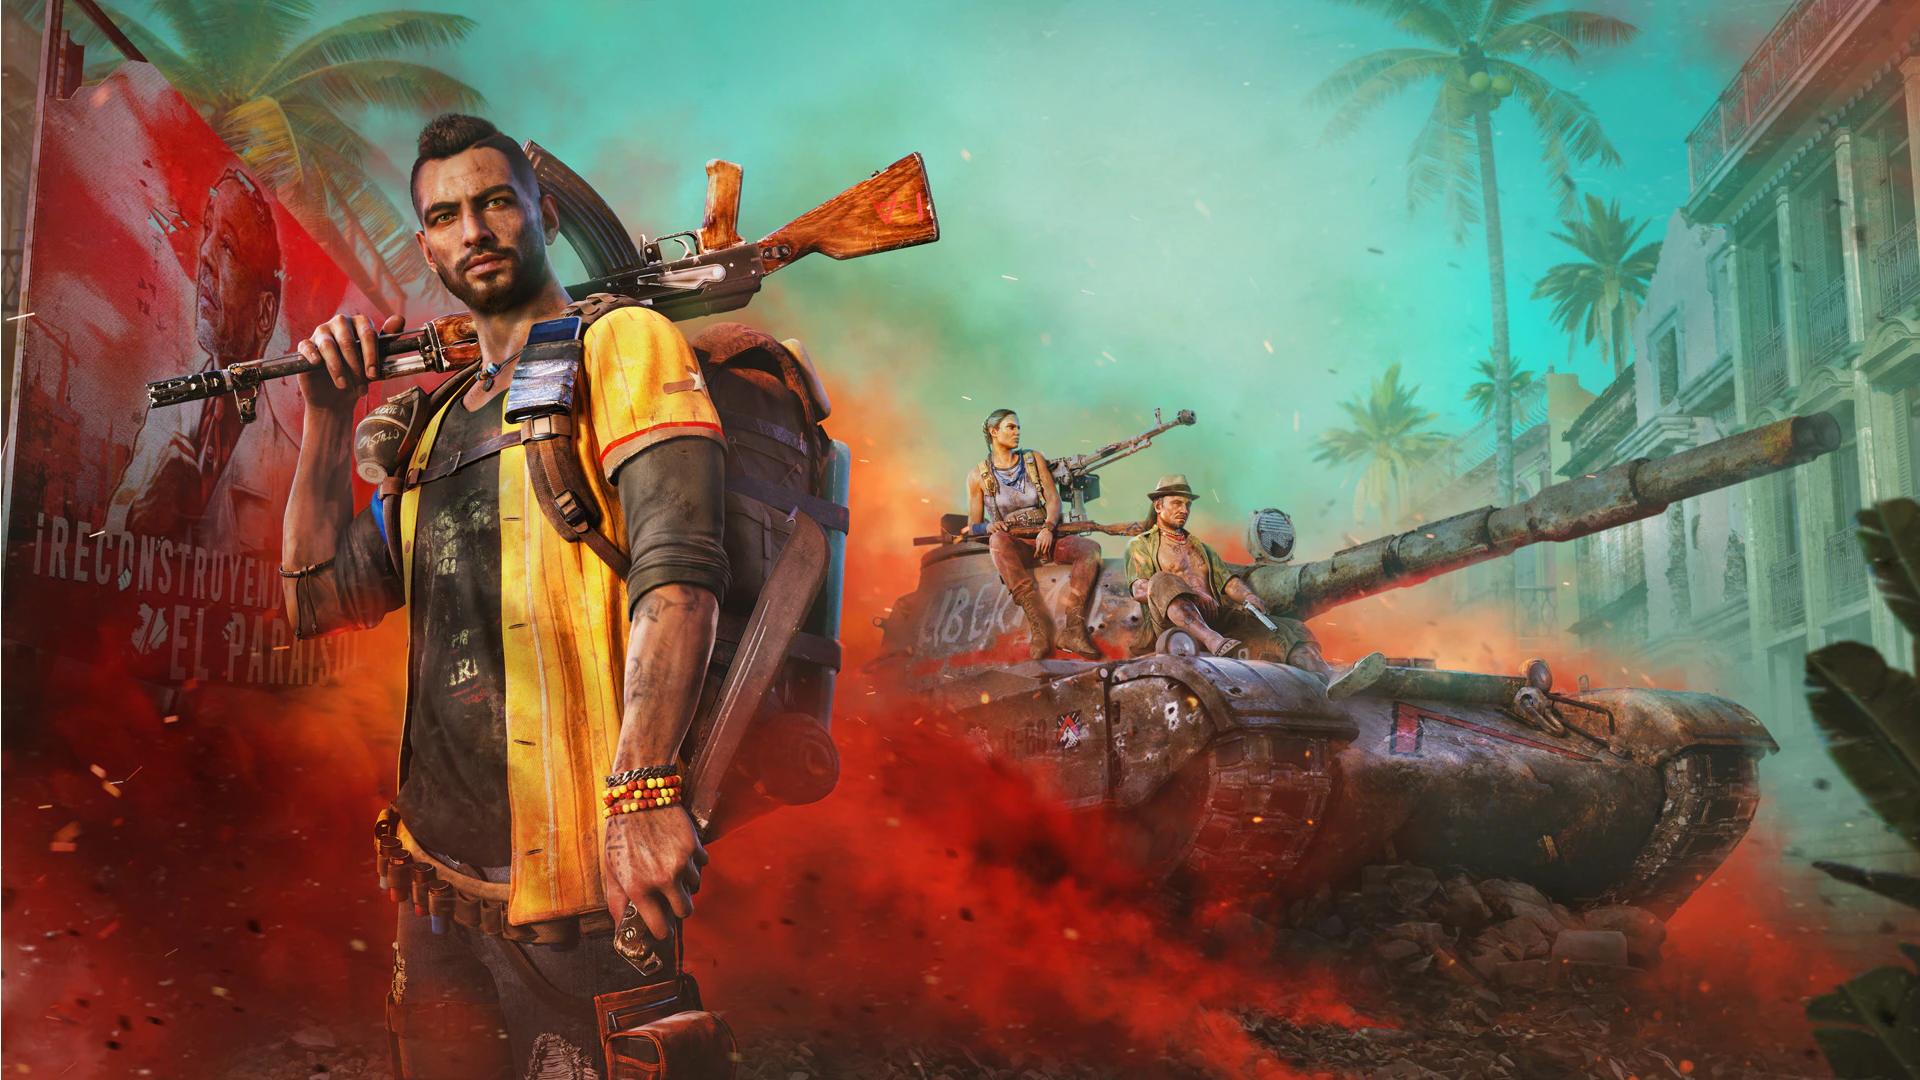 Far Cry 6 is now available with GamePass! 🔥 Go and check it out